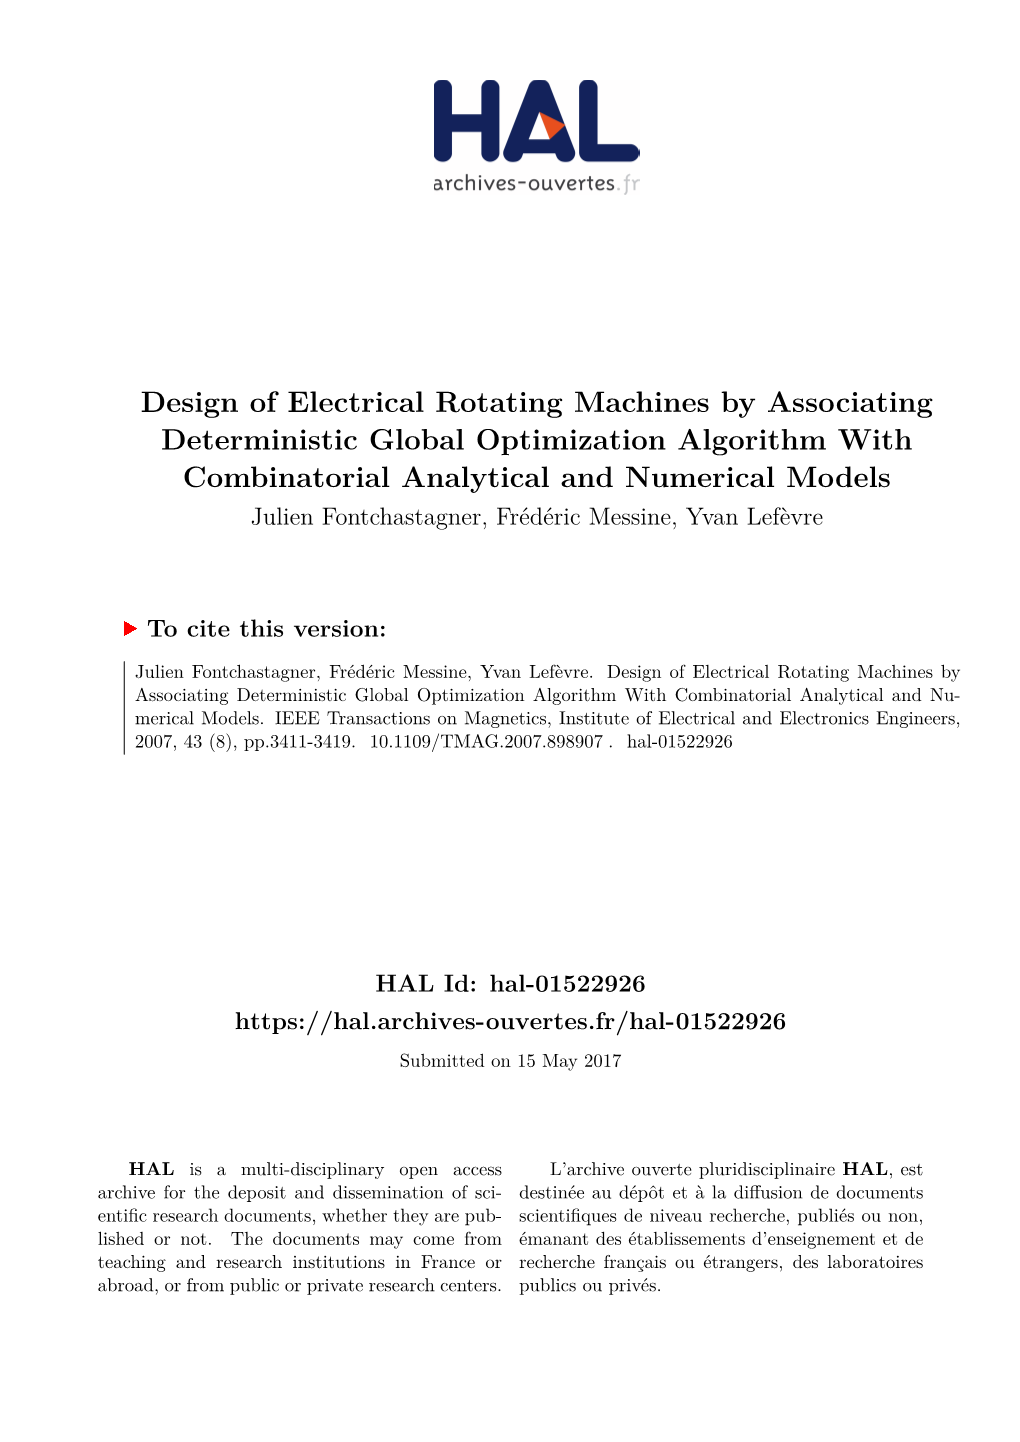 Design of Electrical Rotating Machines By